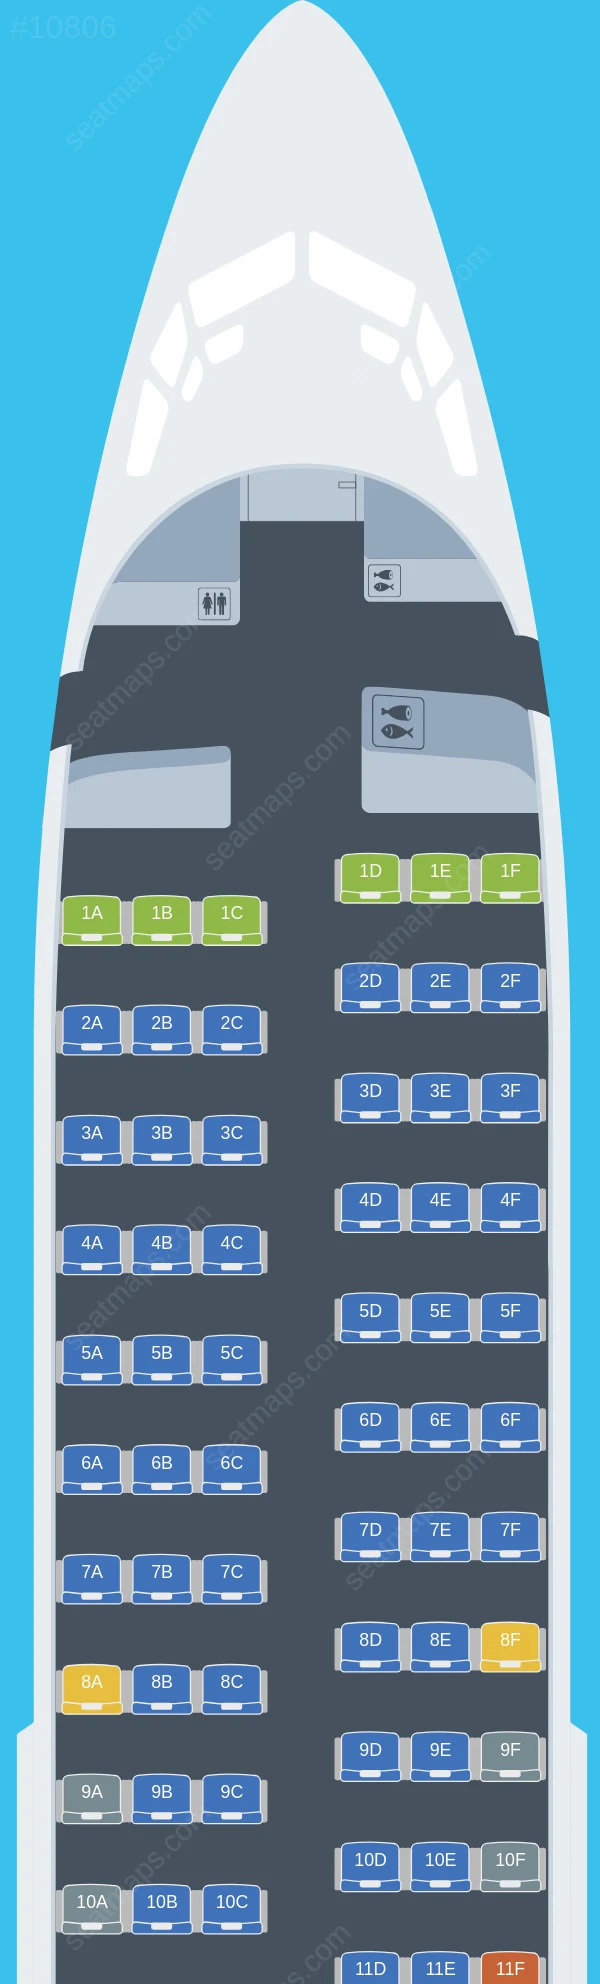 Lumiwings Boeing 737-700 seatmap preview